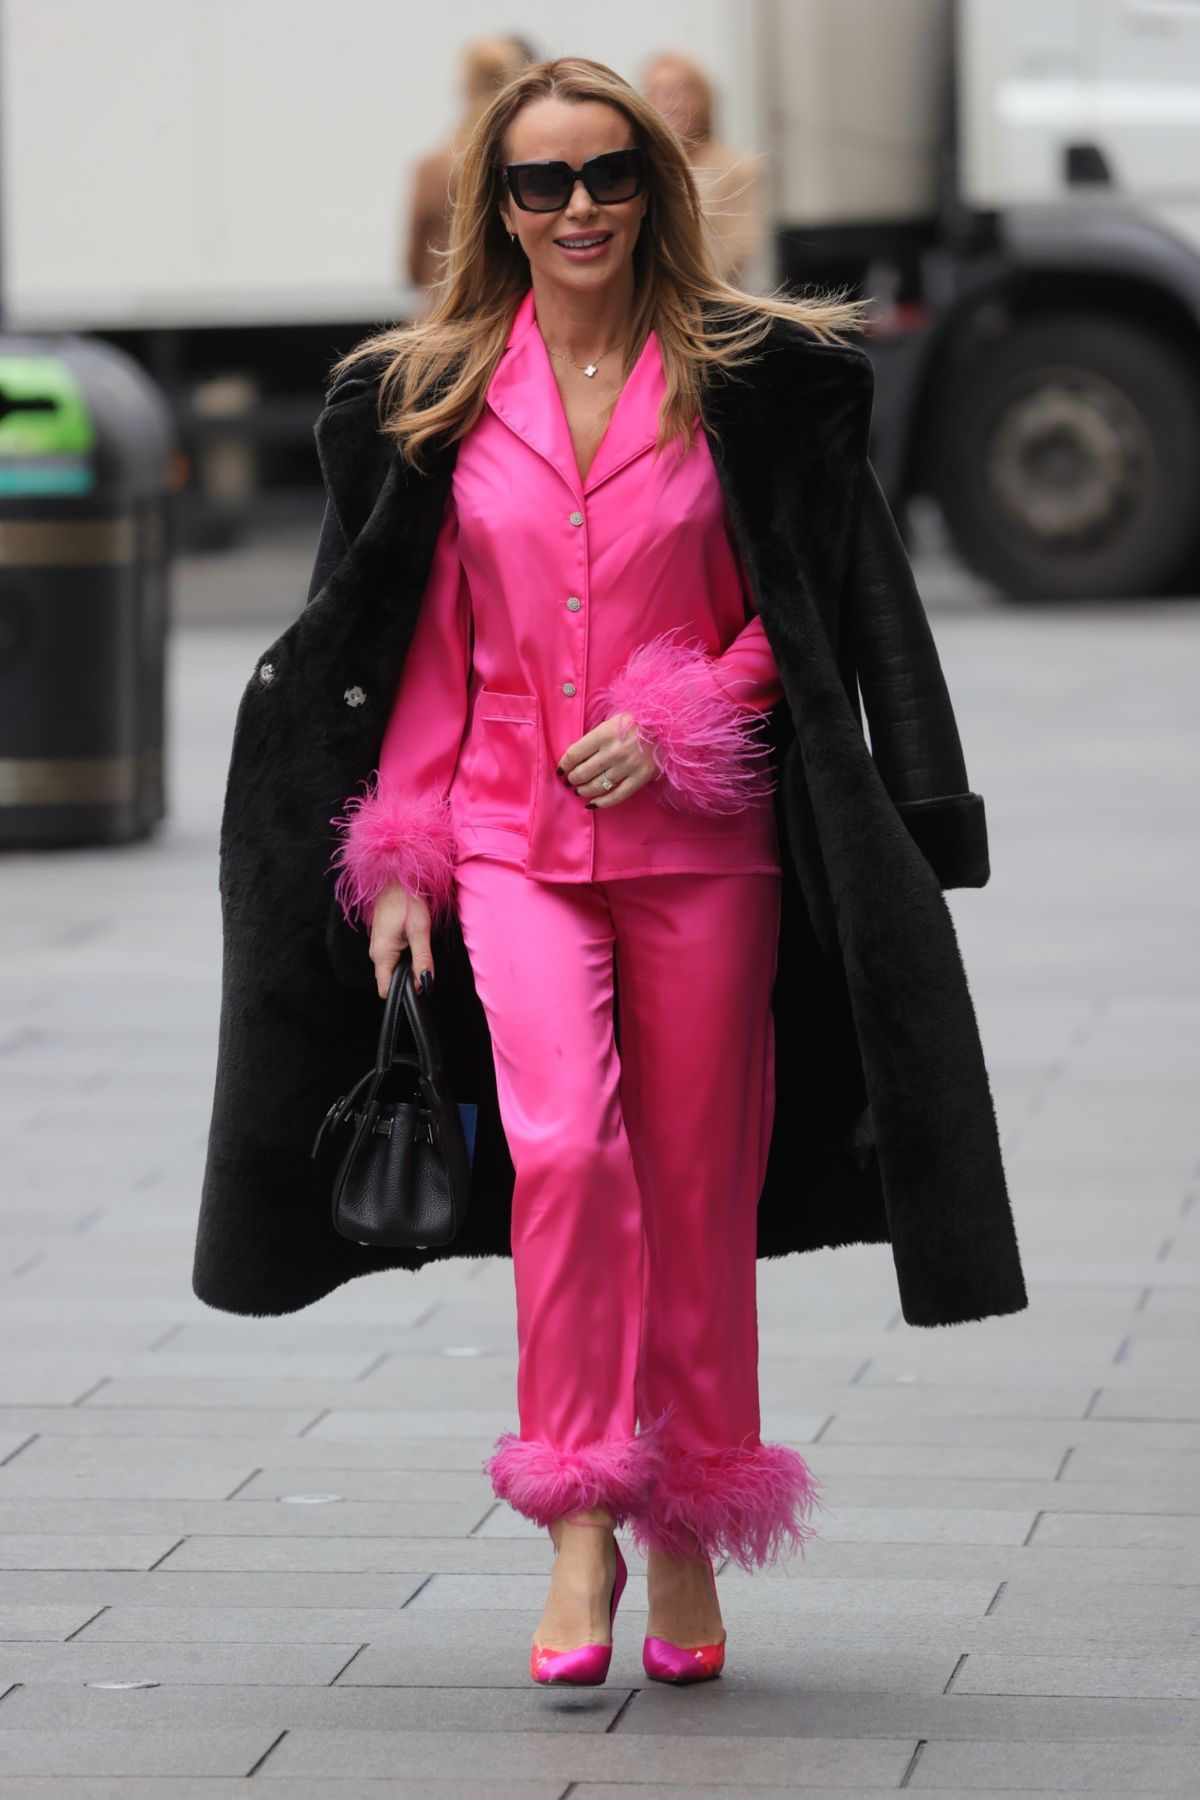 Amanda Holden arrives in Pink Outfit at Heart Radio London 6